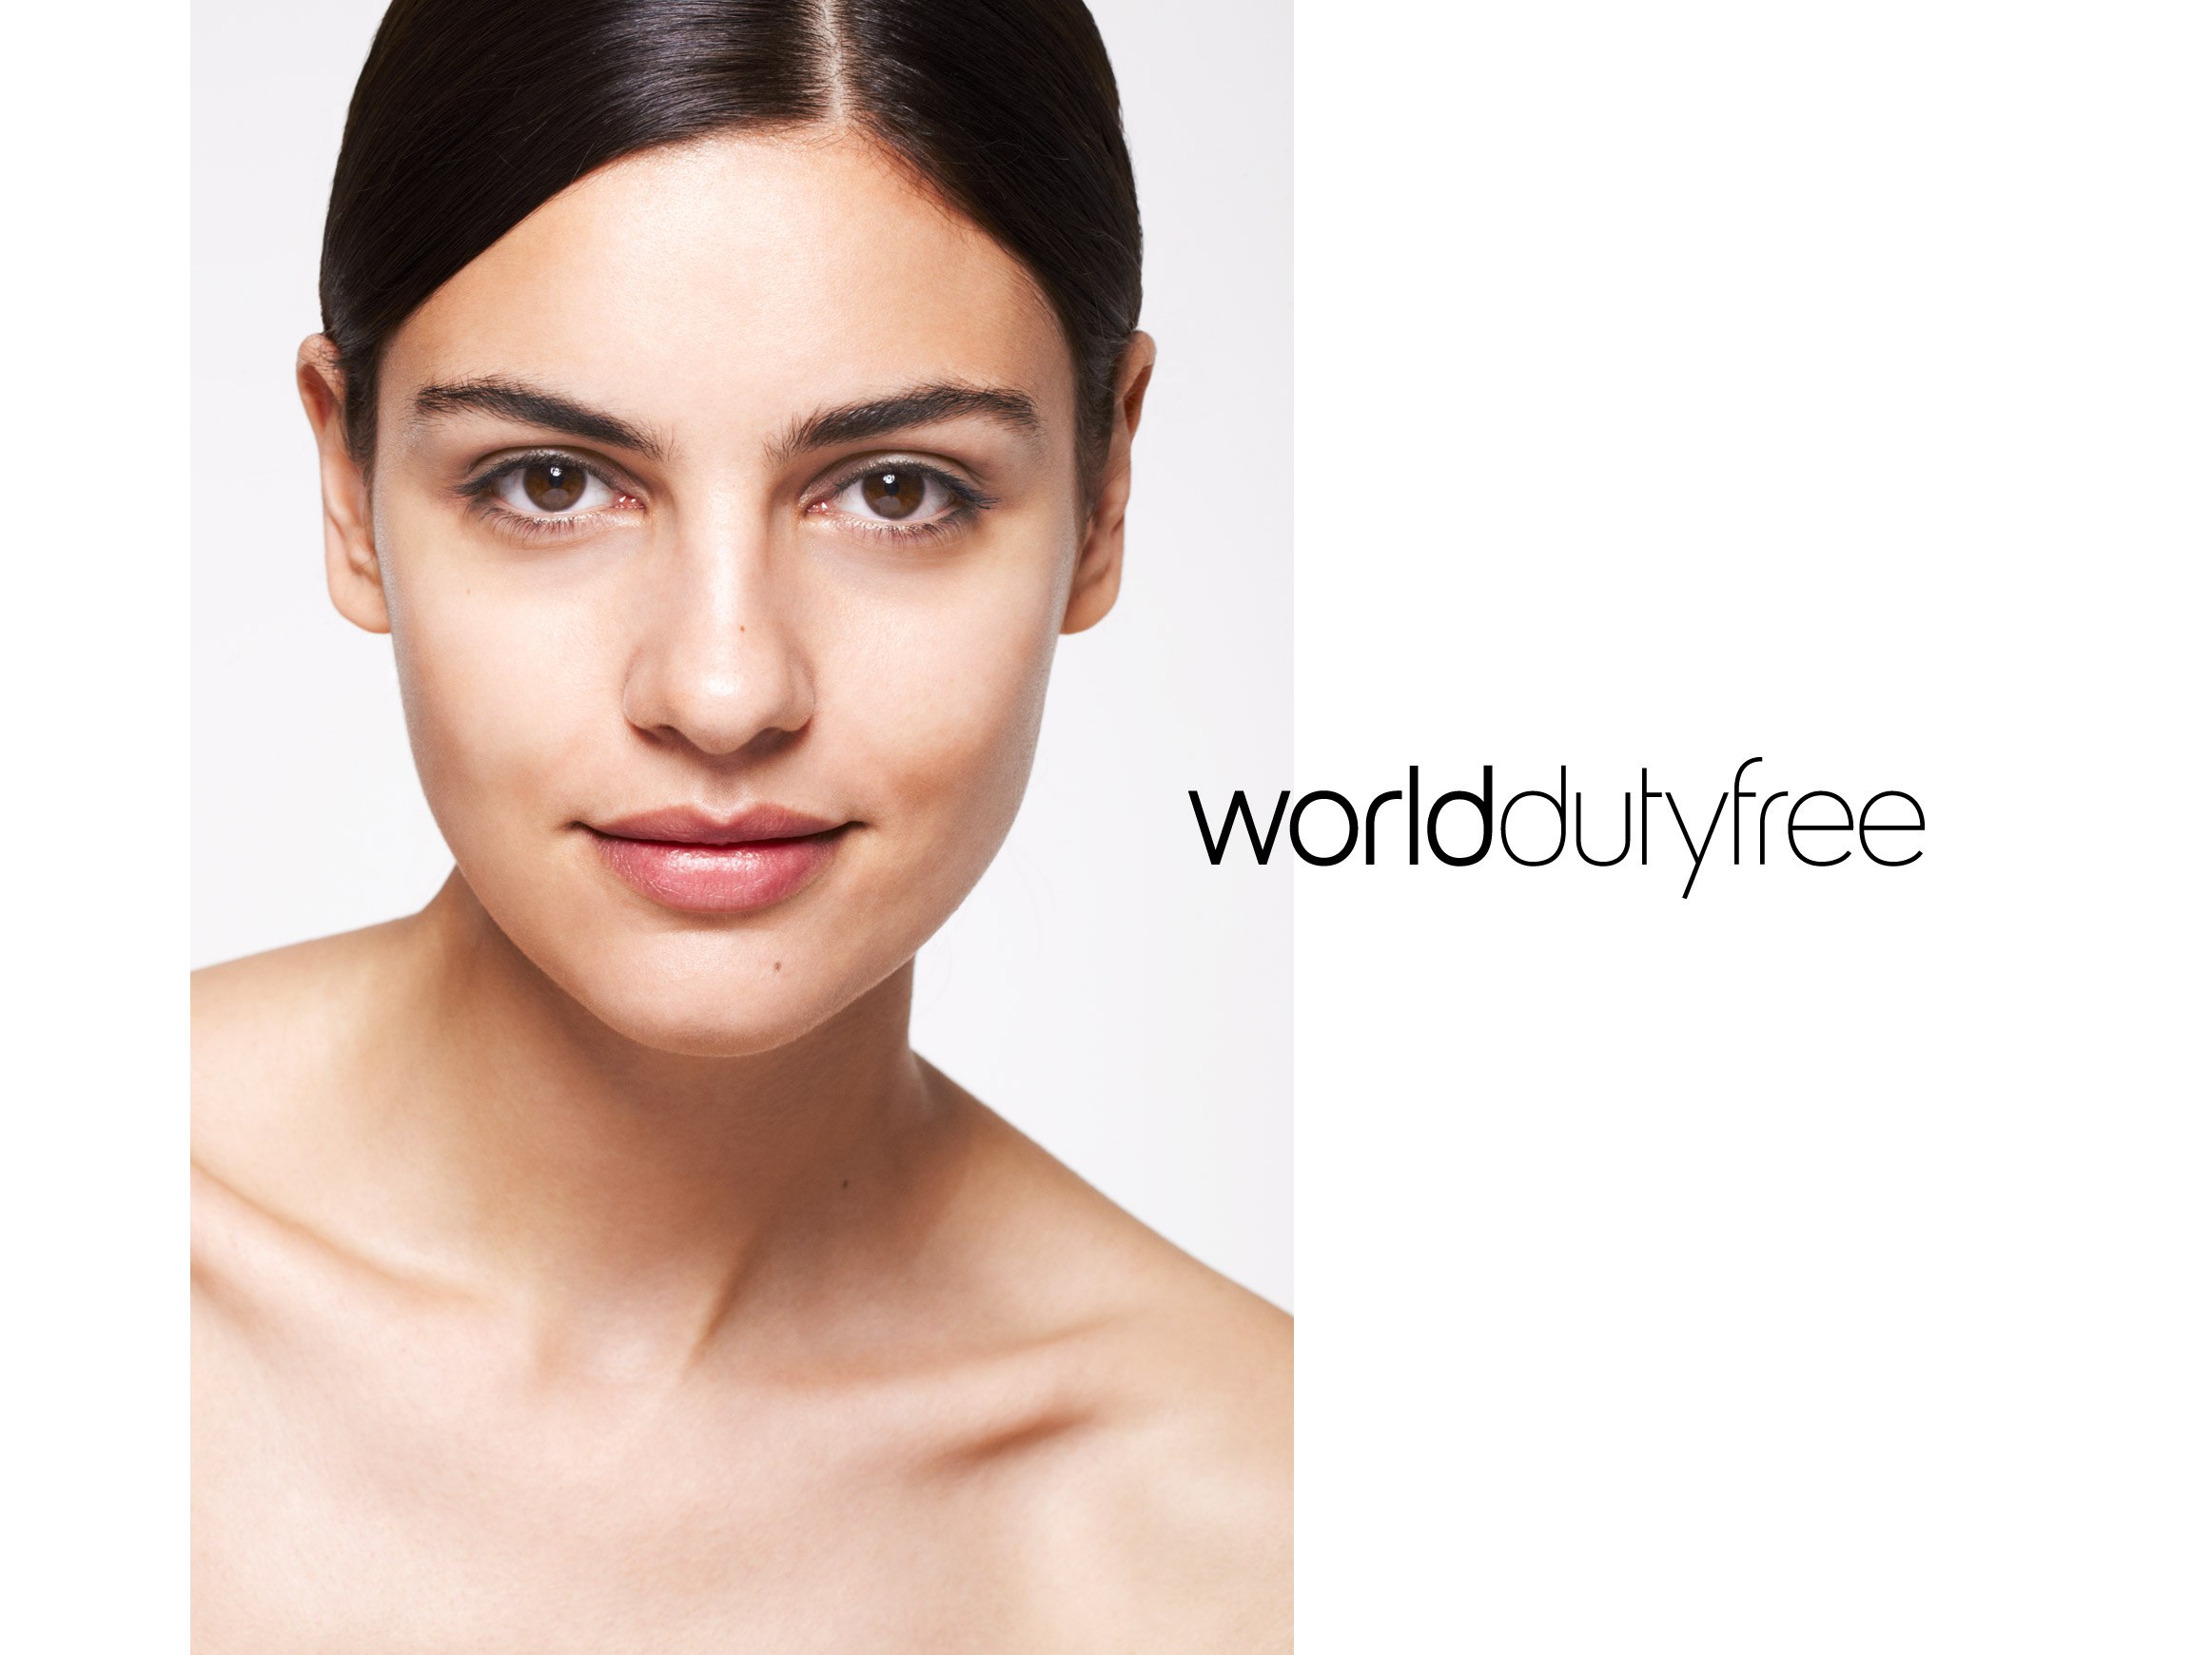 world-duty-free-how-to-bronze-goddess-beauty-shoot-make-up-skin-care-shimmer-sunkissed-ruth-rose-how-to-makeup-3